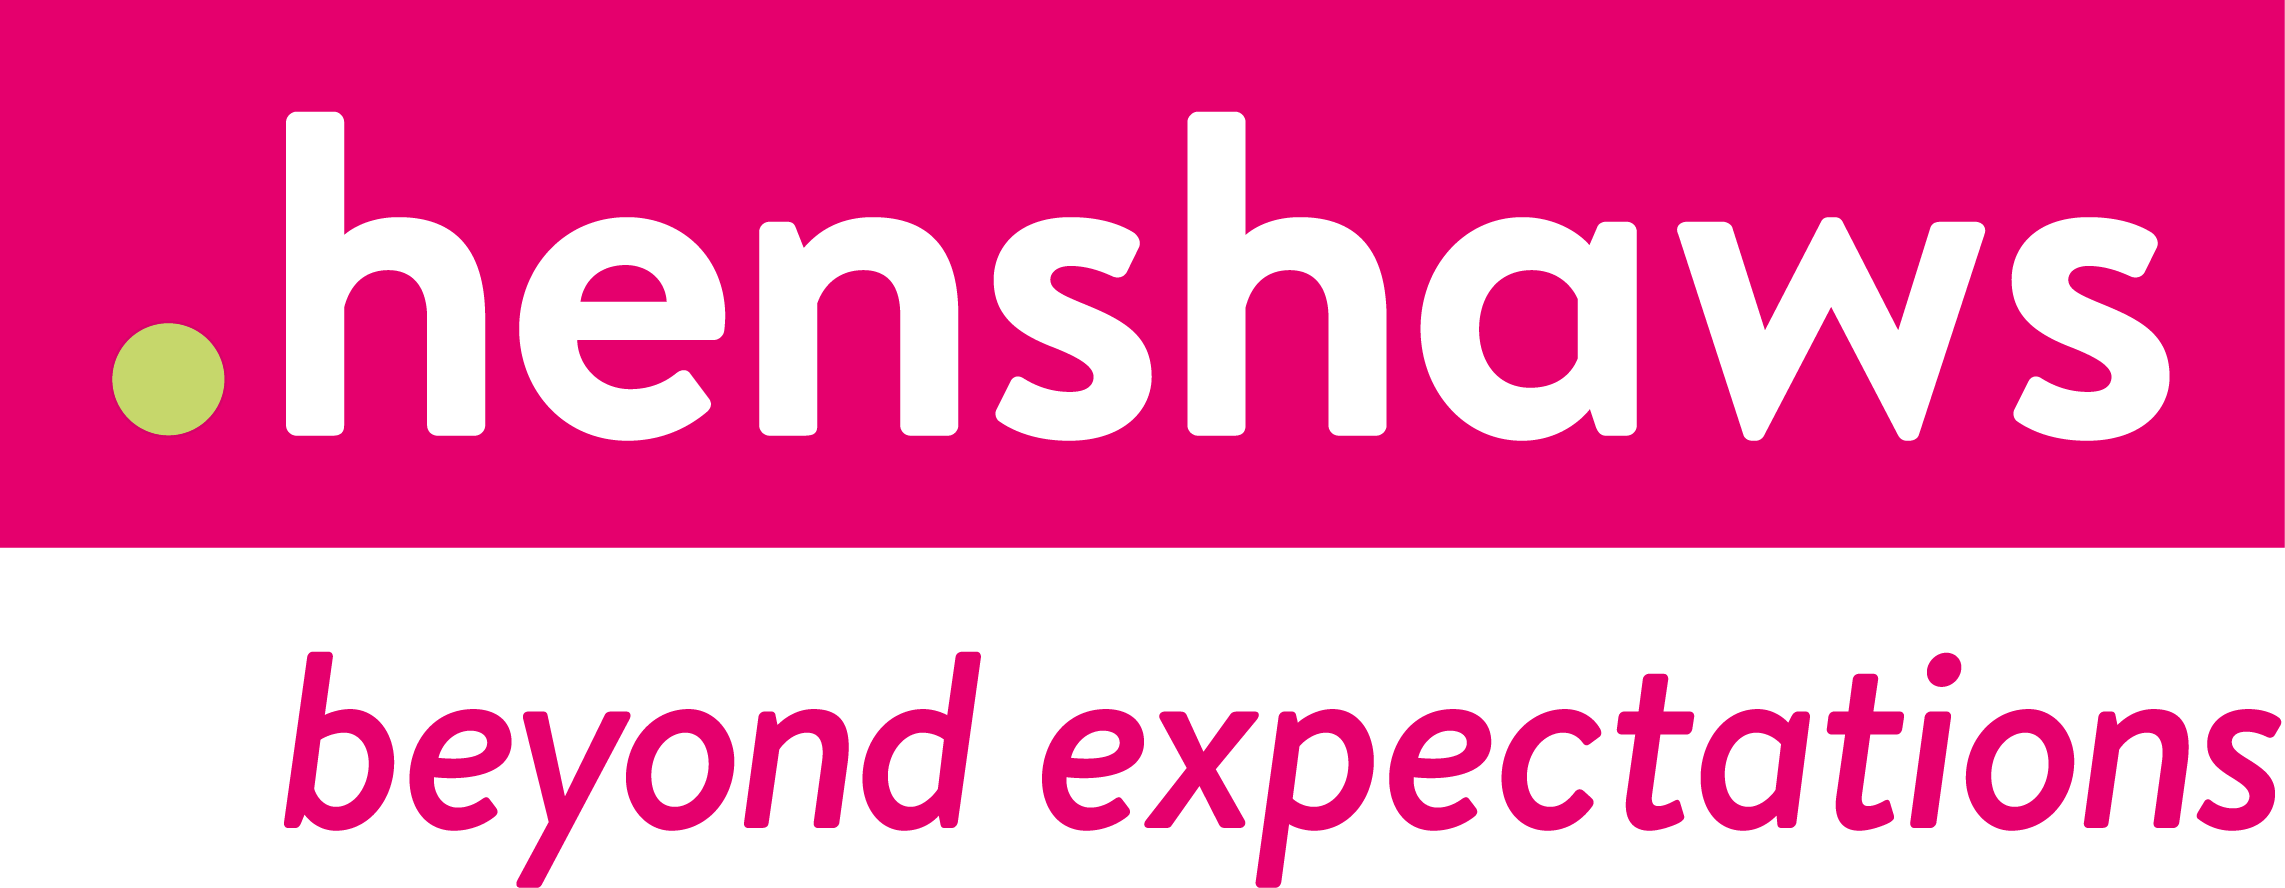 Henshaws logo with strapline "Beyond expectations".